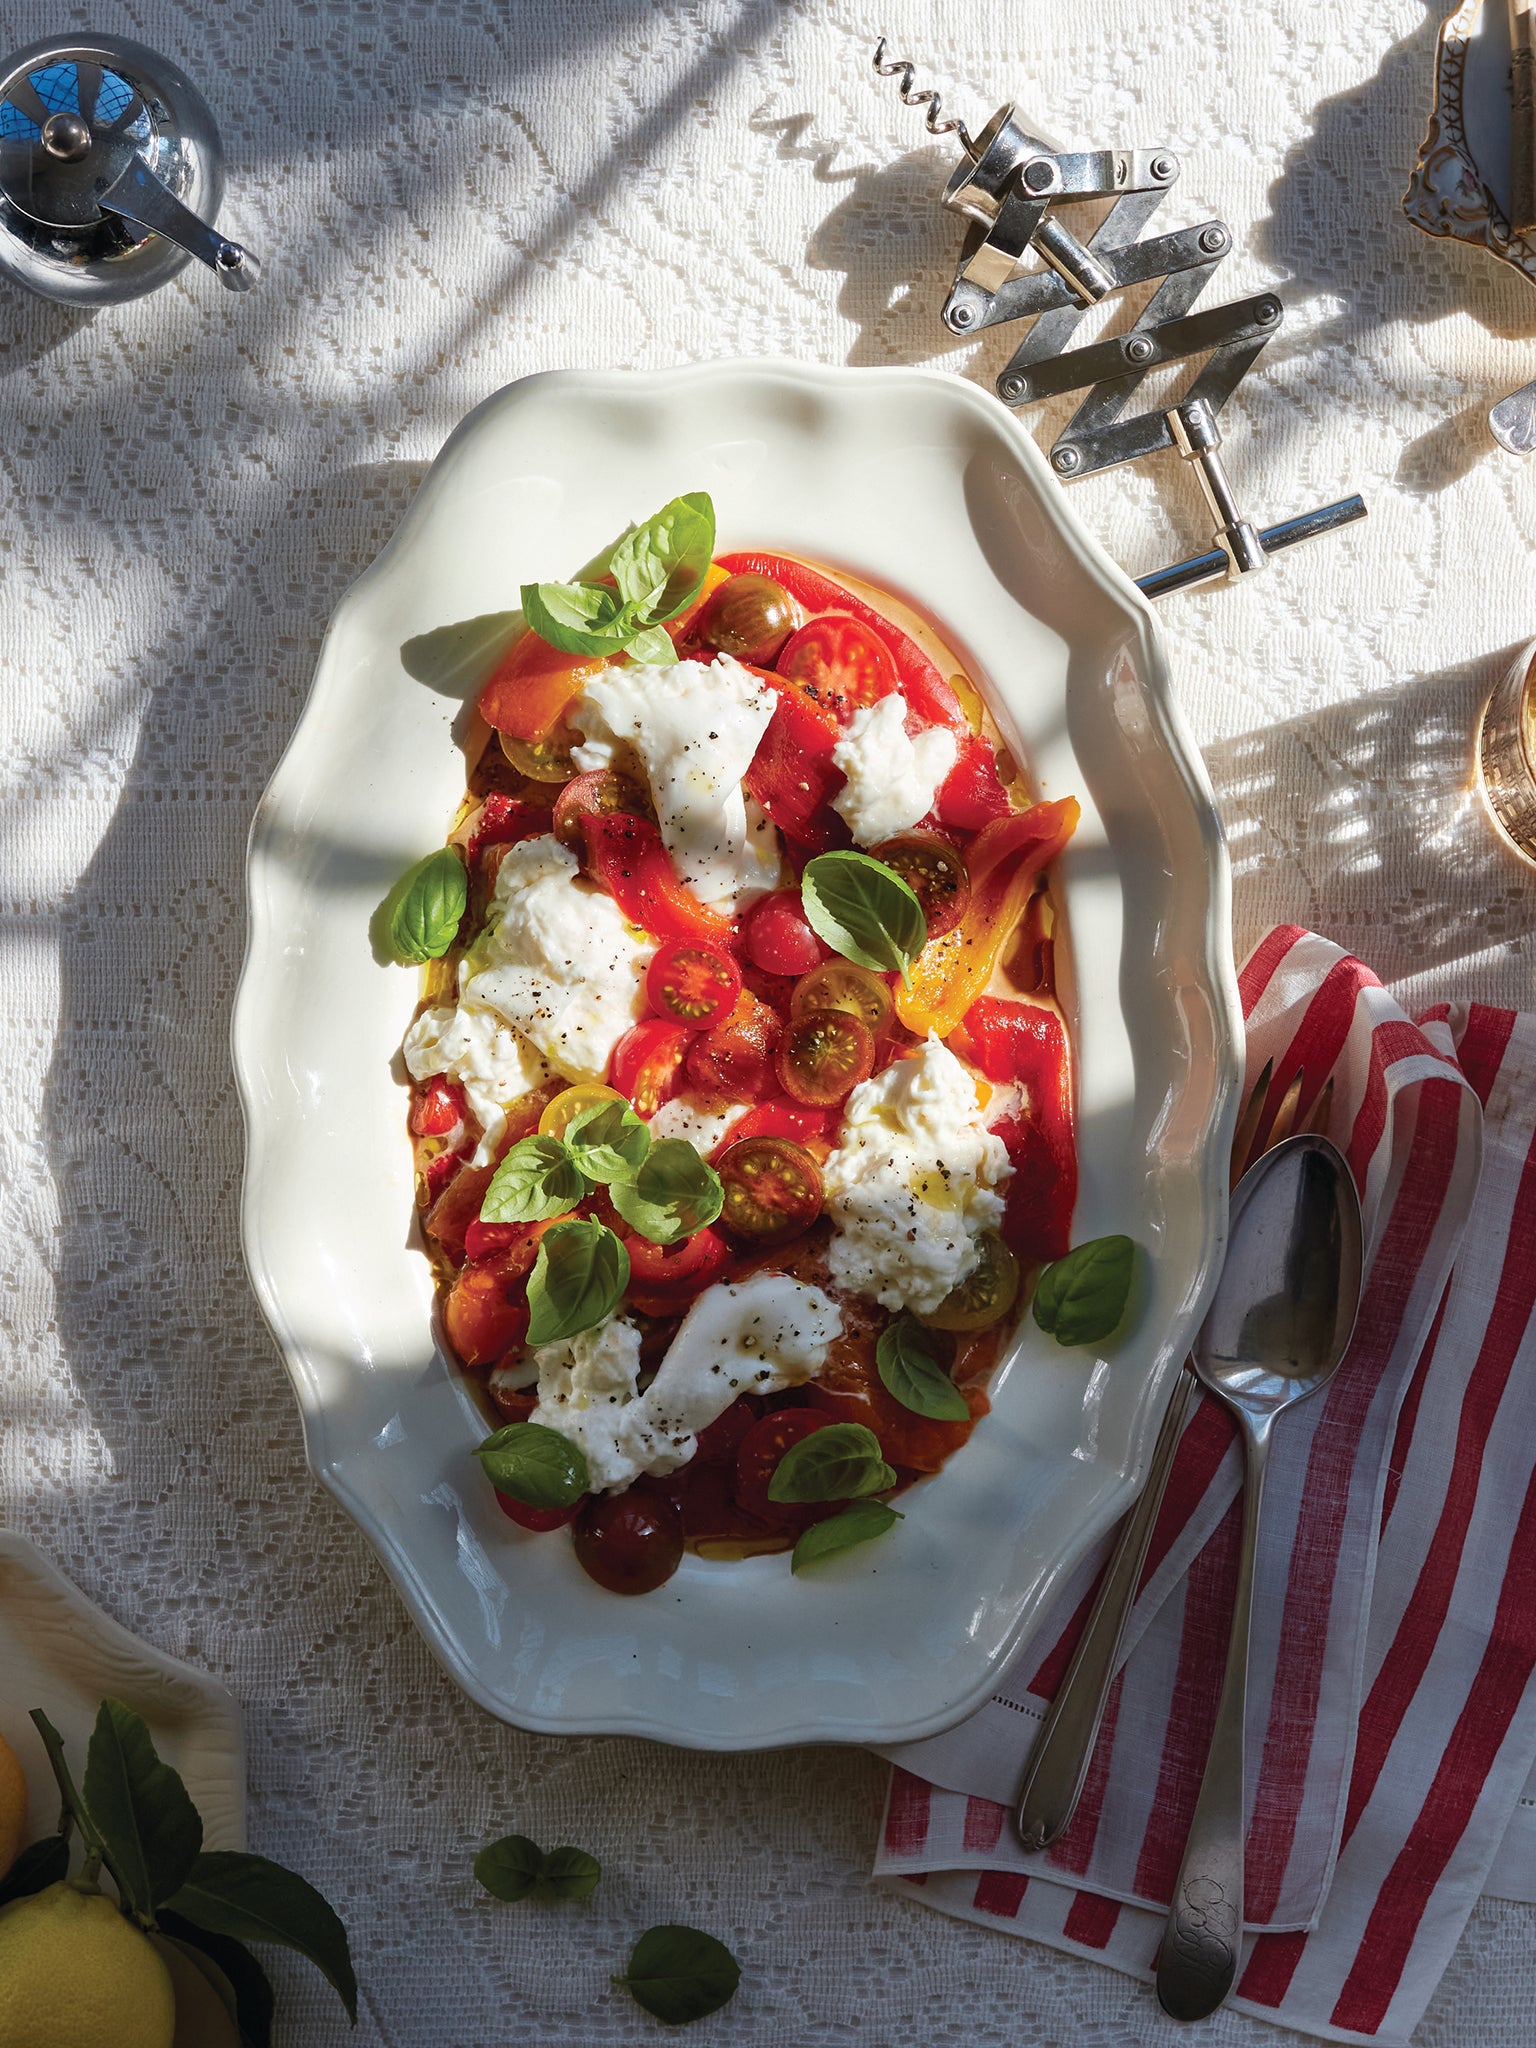 Get ready for summer with this fresh vegetarian salad